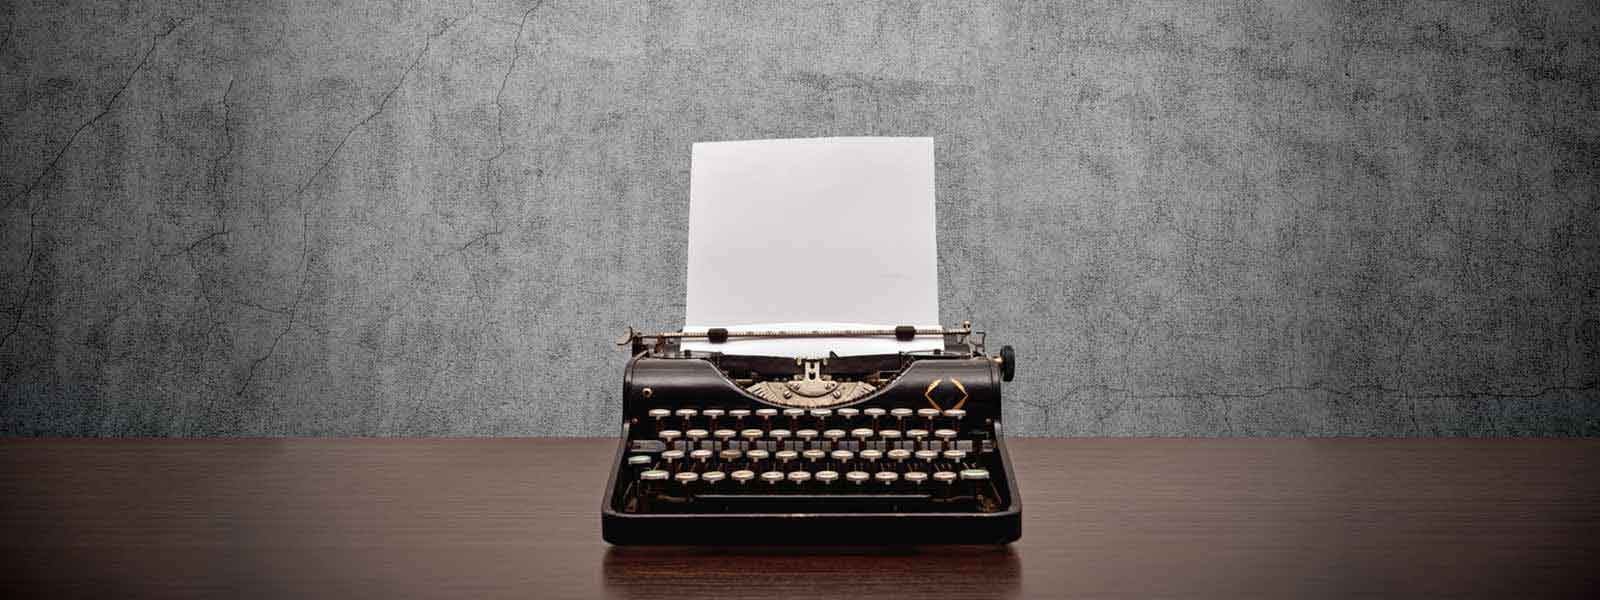 Typewriter and white paper symbolizes engaging content